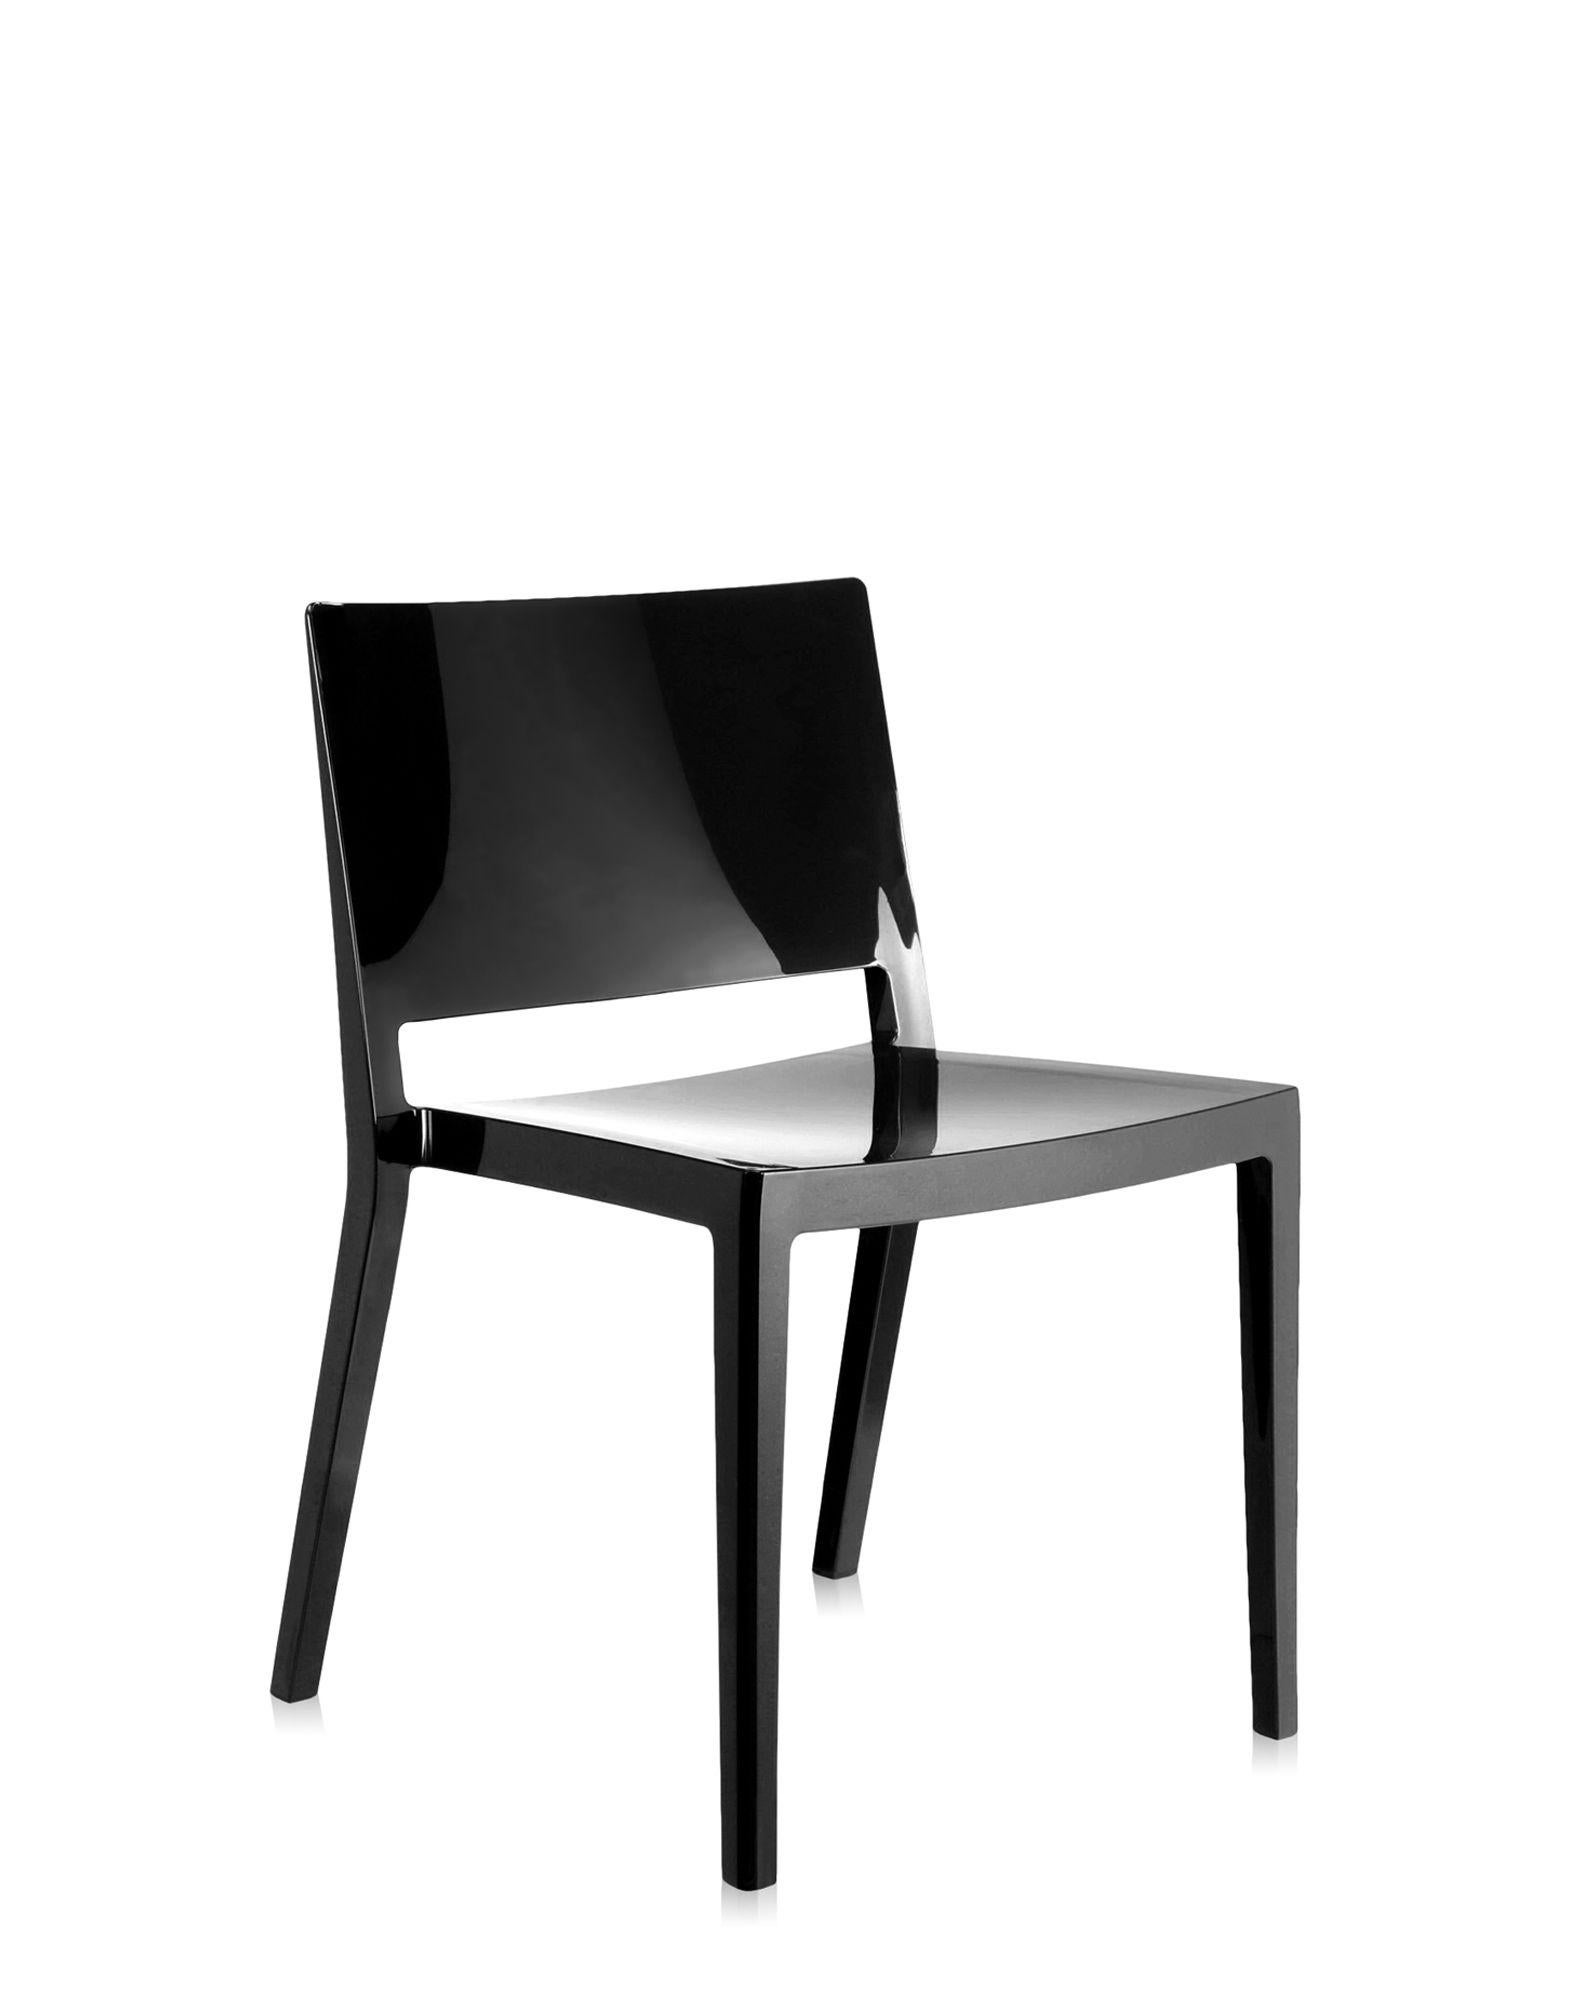 A light, ultra-streamlined chair, so representative of the Minimalist and elegant style of its designer, Piero Lissoni. Made of a mass-tinted thermoplastic technopolymer, Lizz is manufactured in a single piece, using gas-blowing technology. Its name